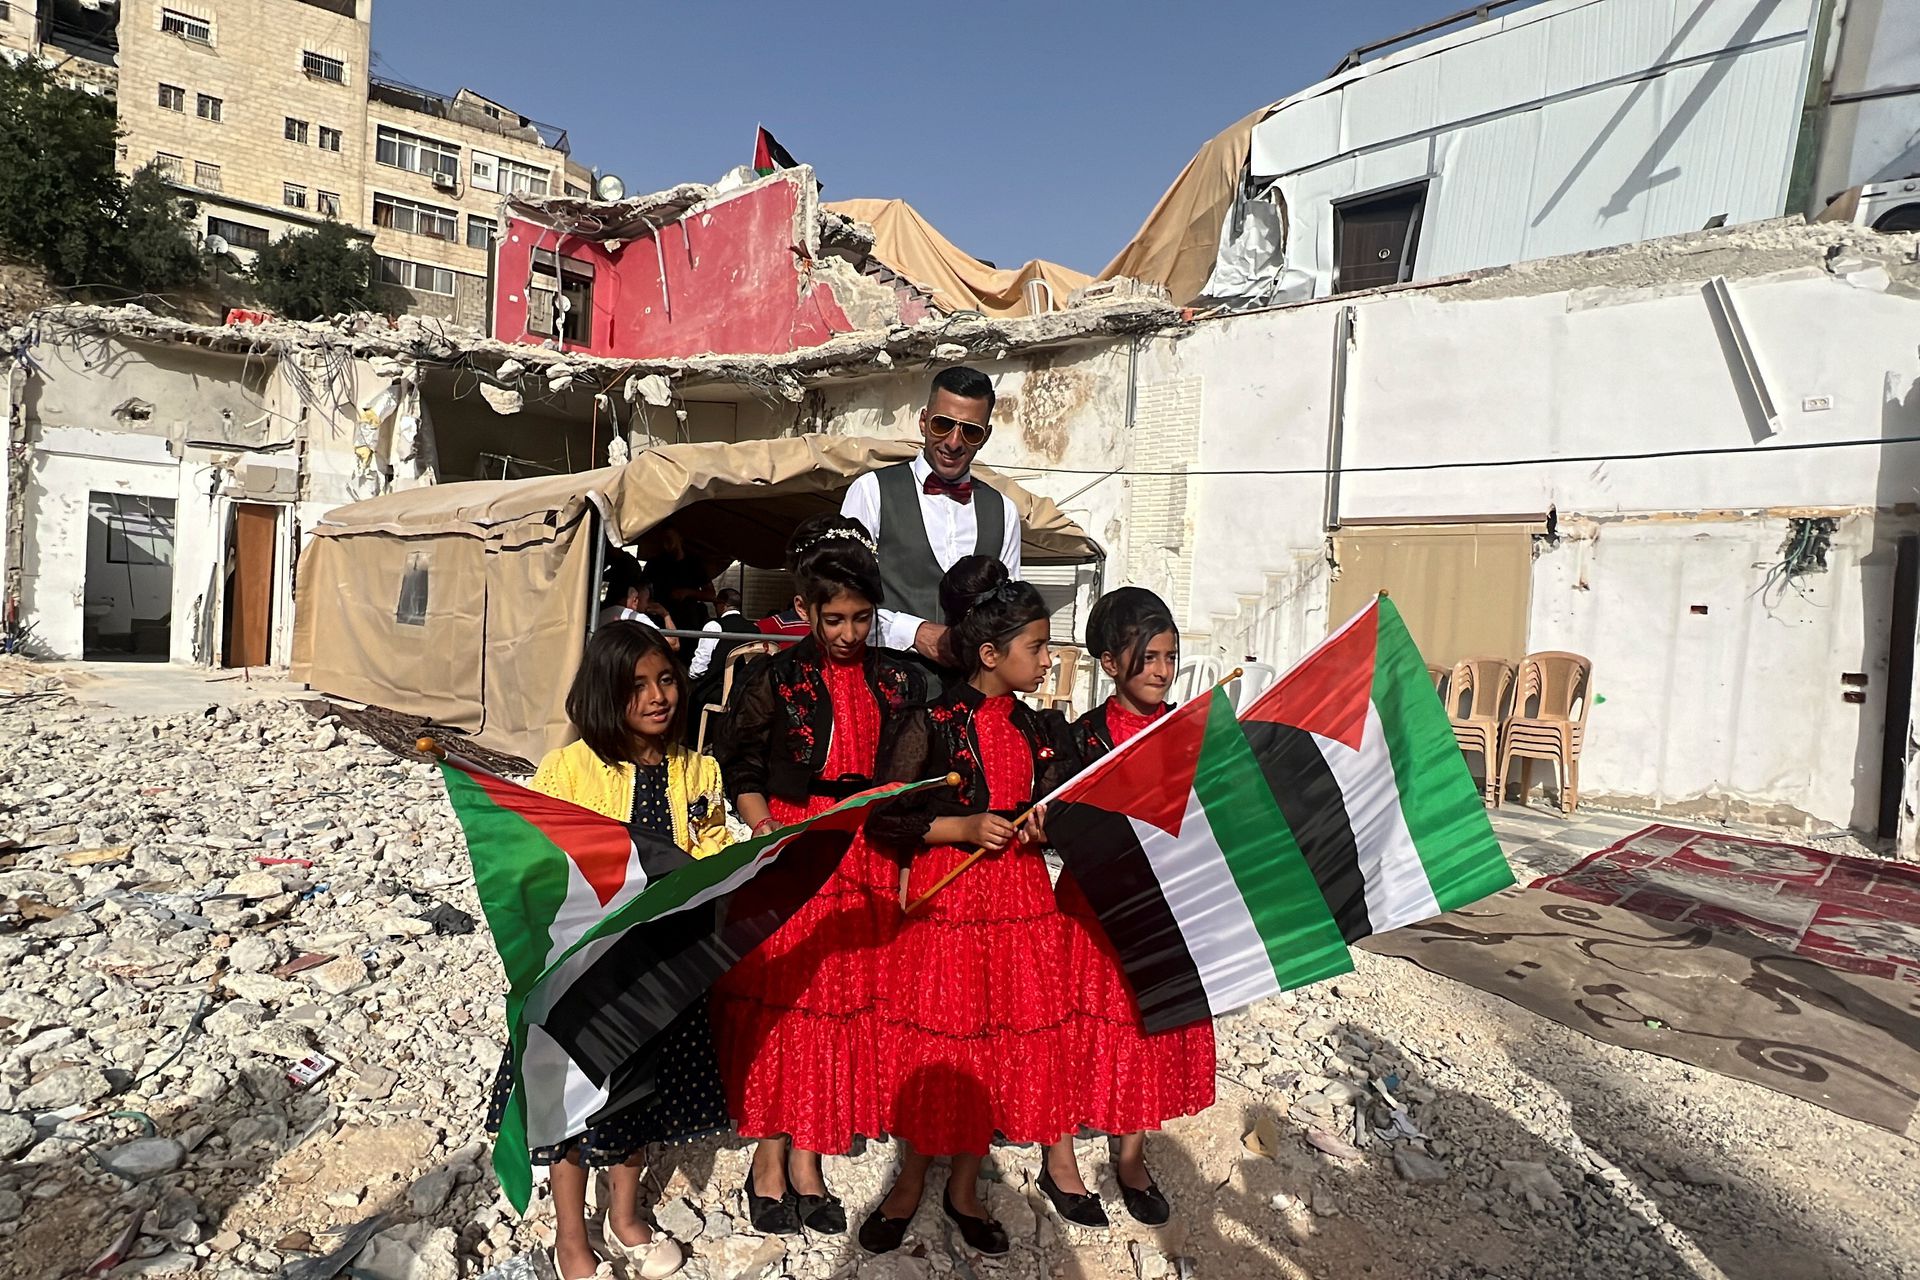 Feras, brother of a Palestinian bride Rabeha Al-Rajabi, stands together with girls during a pre-wedding ceremony at the family's house, that was partly demolished by Israel authority, in East Jerusalem, June 11. Photo: Ammar Awad/Reuters